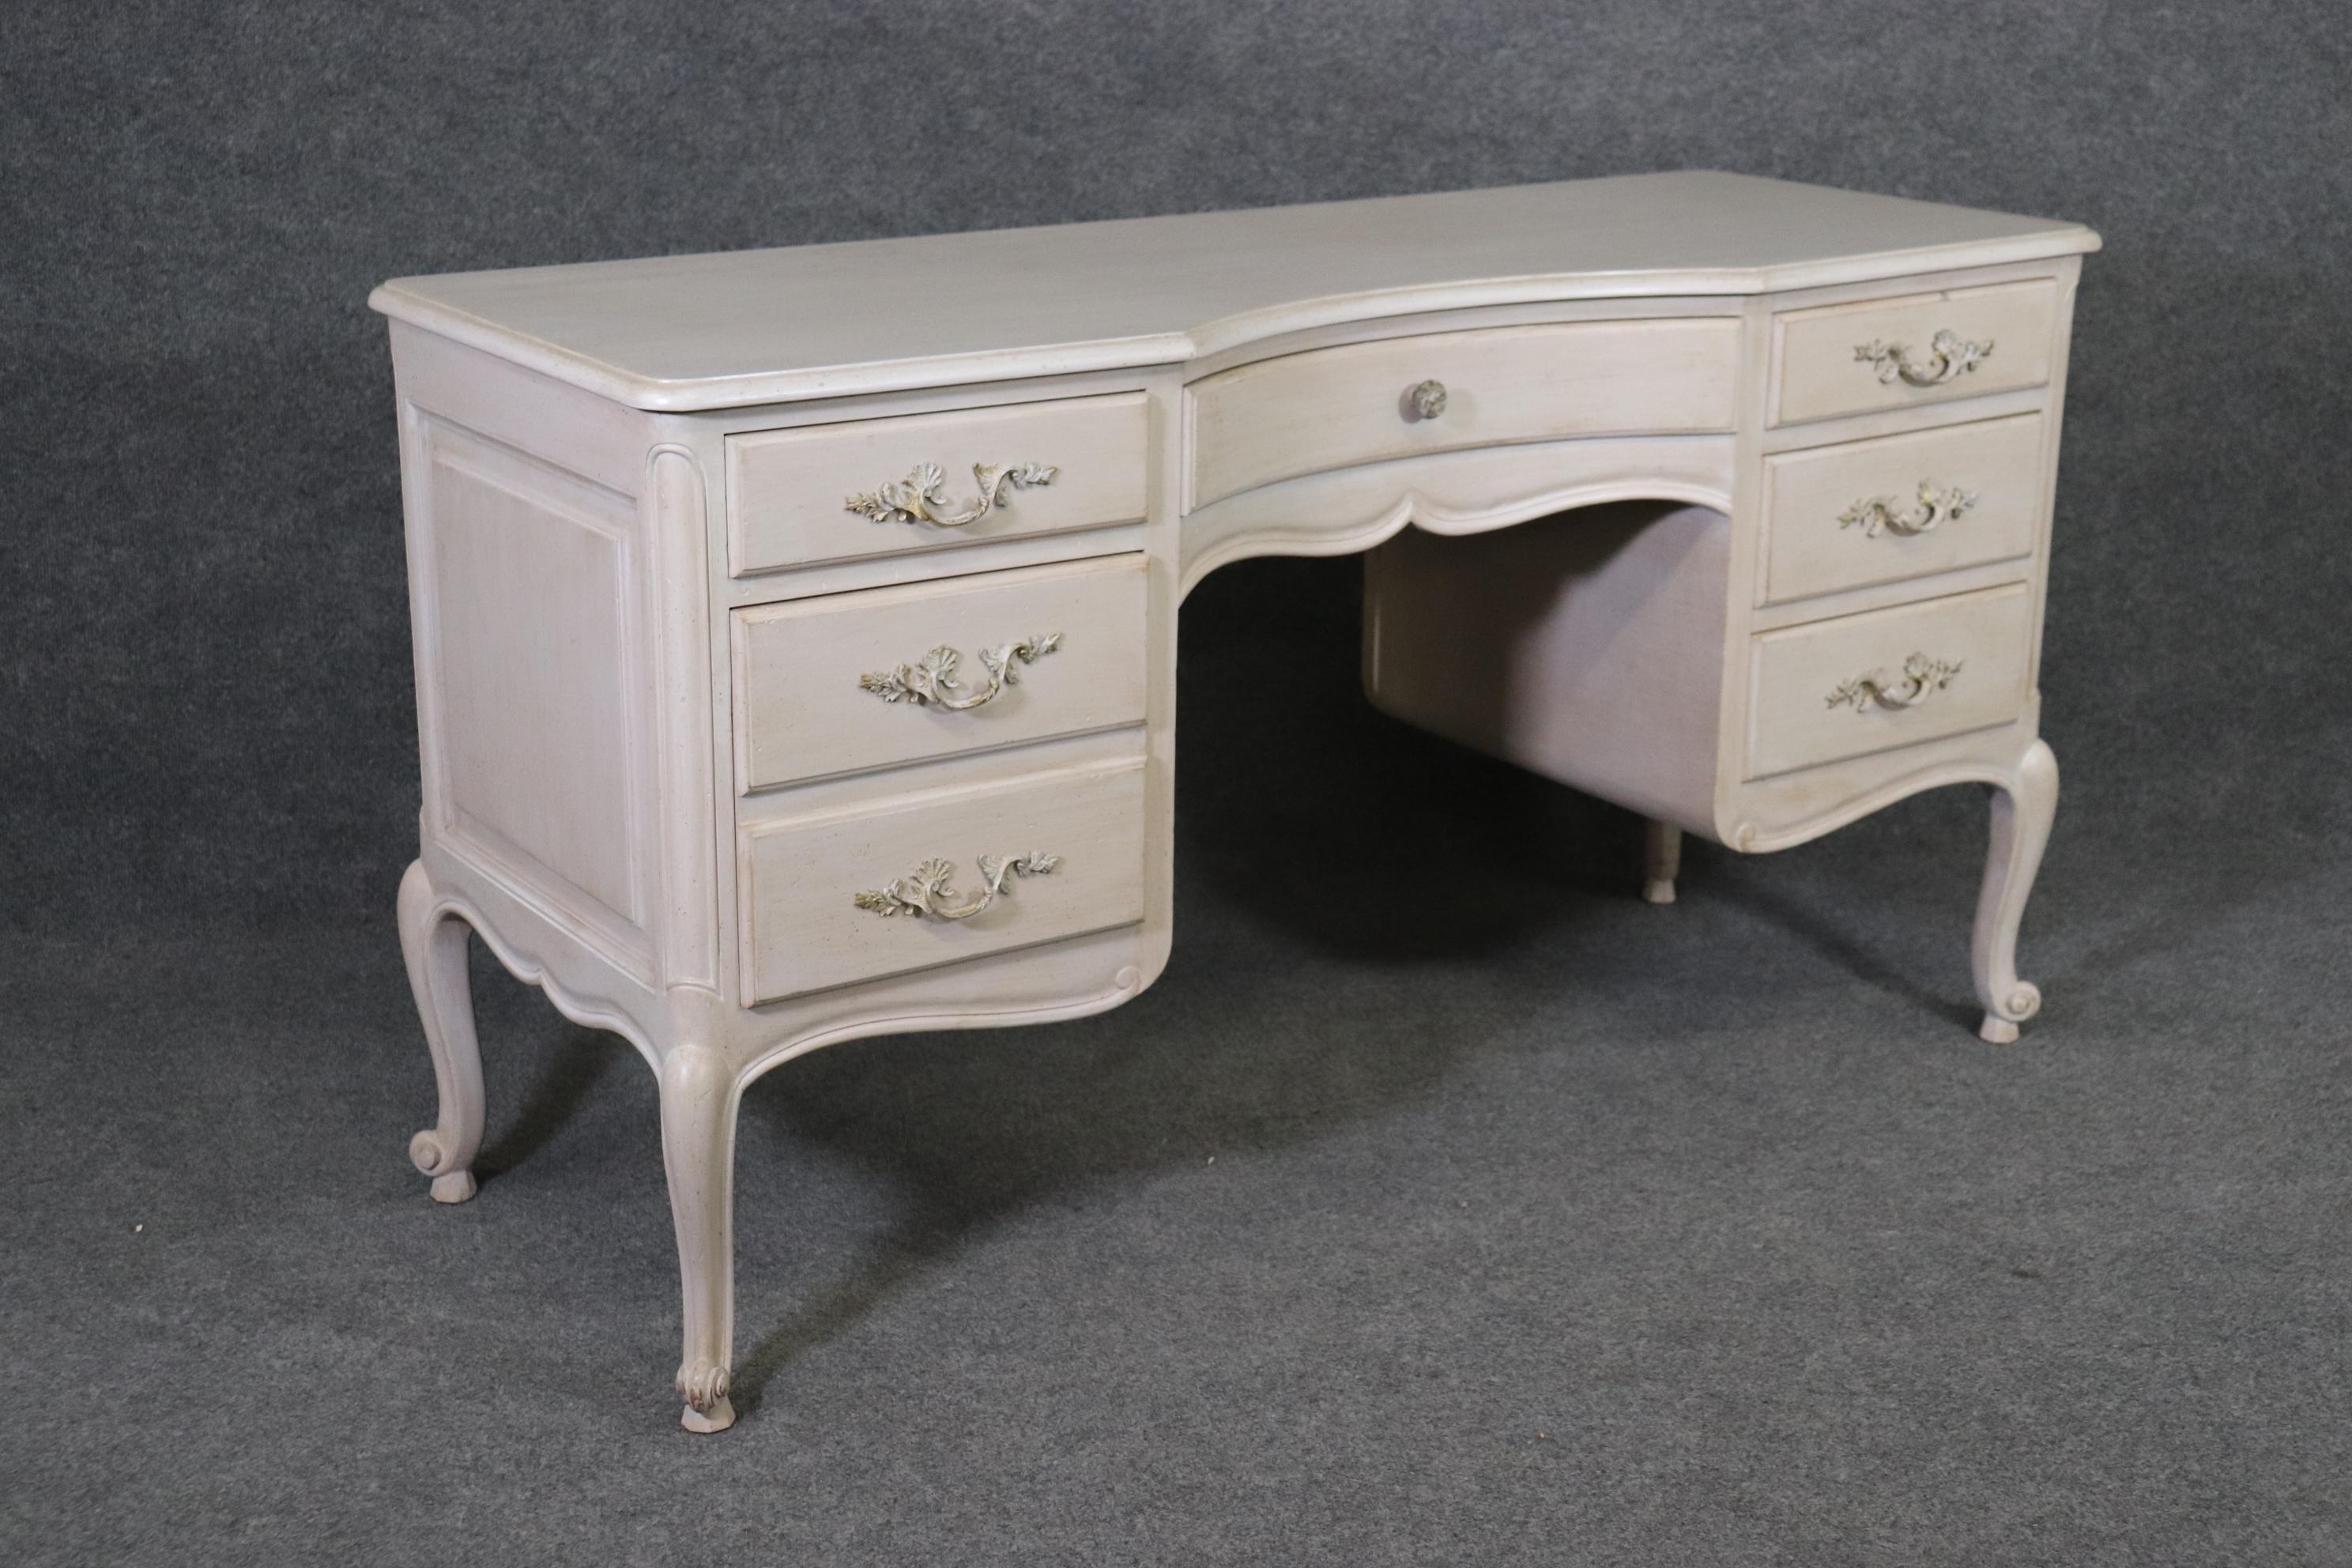 This is a beautifully done shallow depth French Louis XV style American made ladies vanity or writing desk. The piece can be used as a desk because the back is finished. The piece is in good condition and measures 55.5 wide x 21 deep x 30.25 and